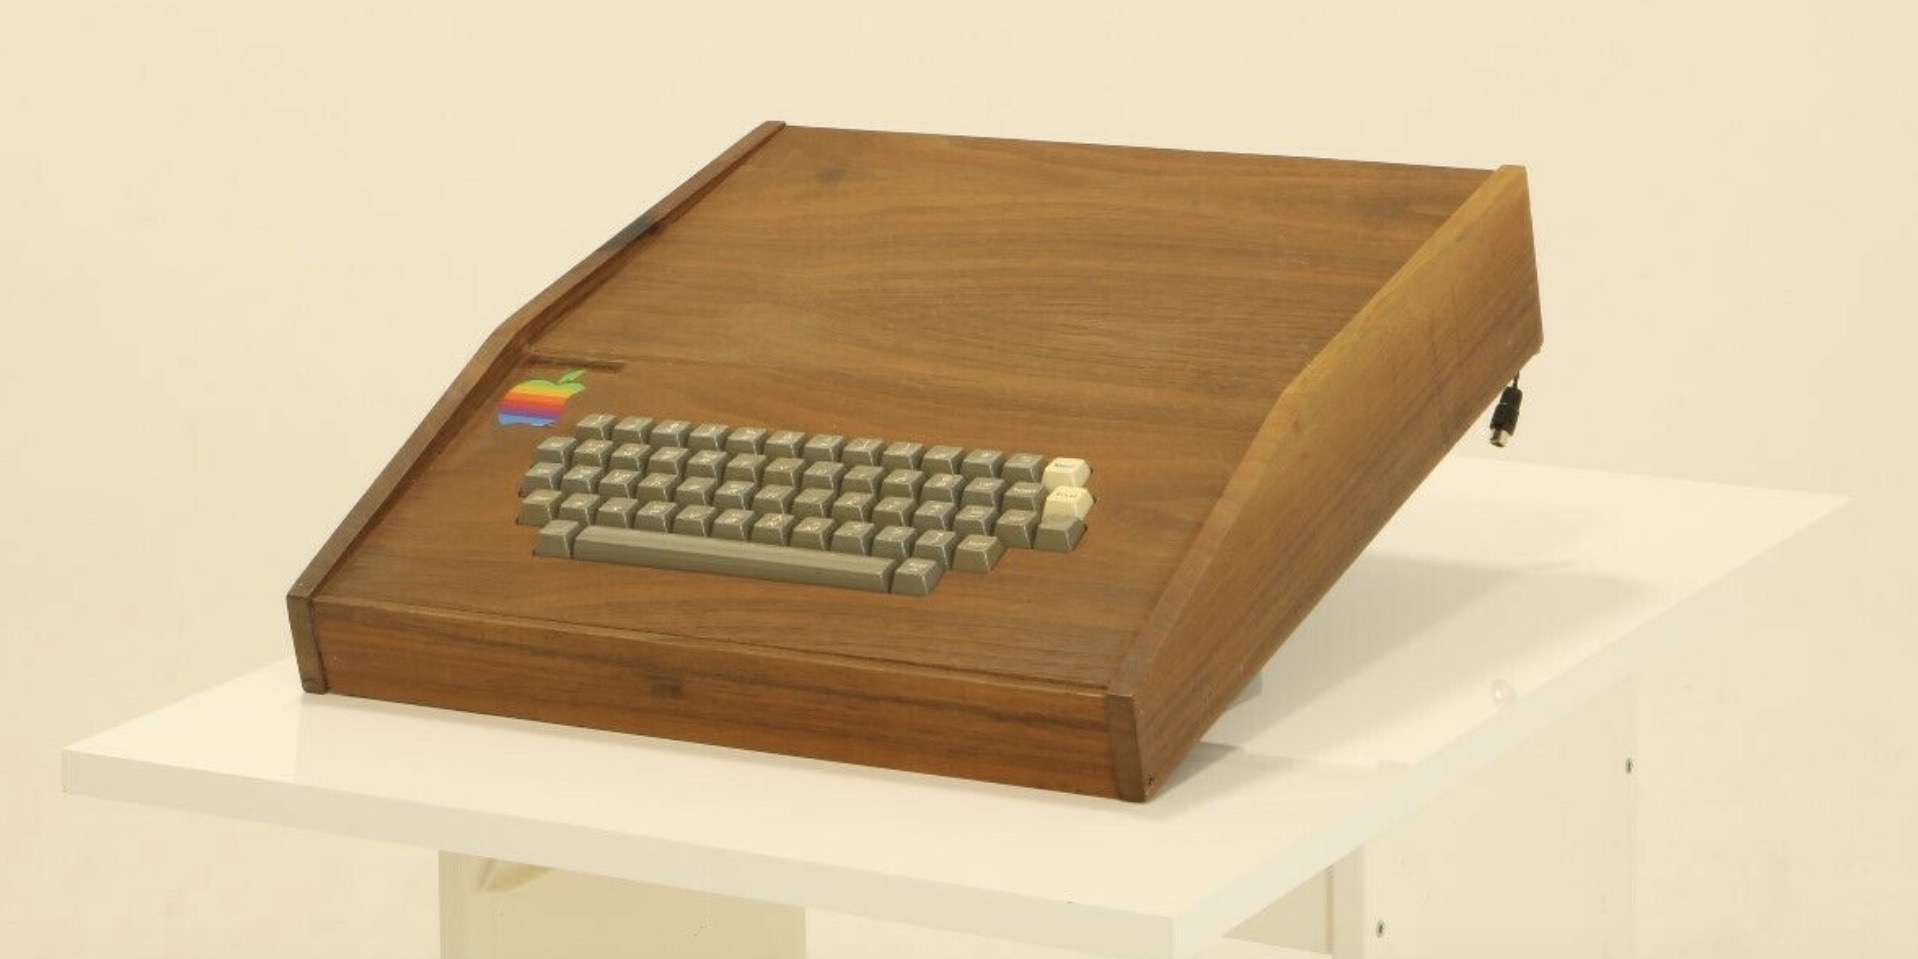 Apple 1 In Almost Perfect Condition W Custom Wood Case Hopes To